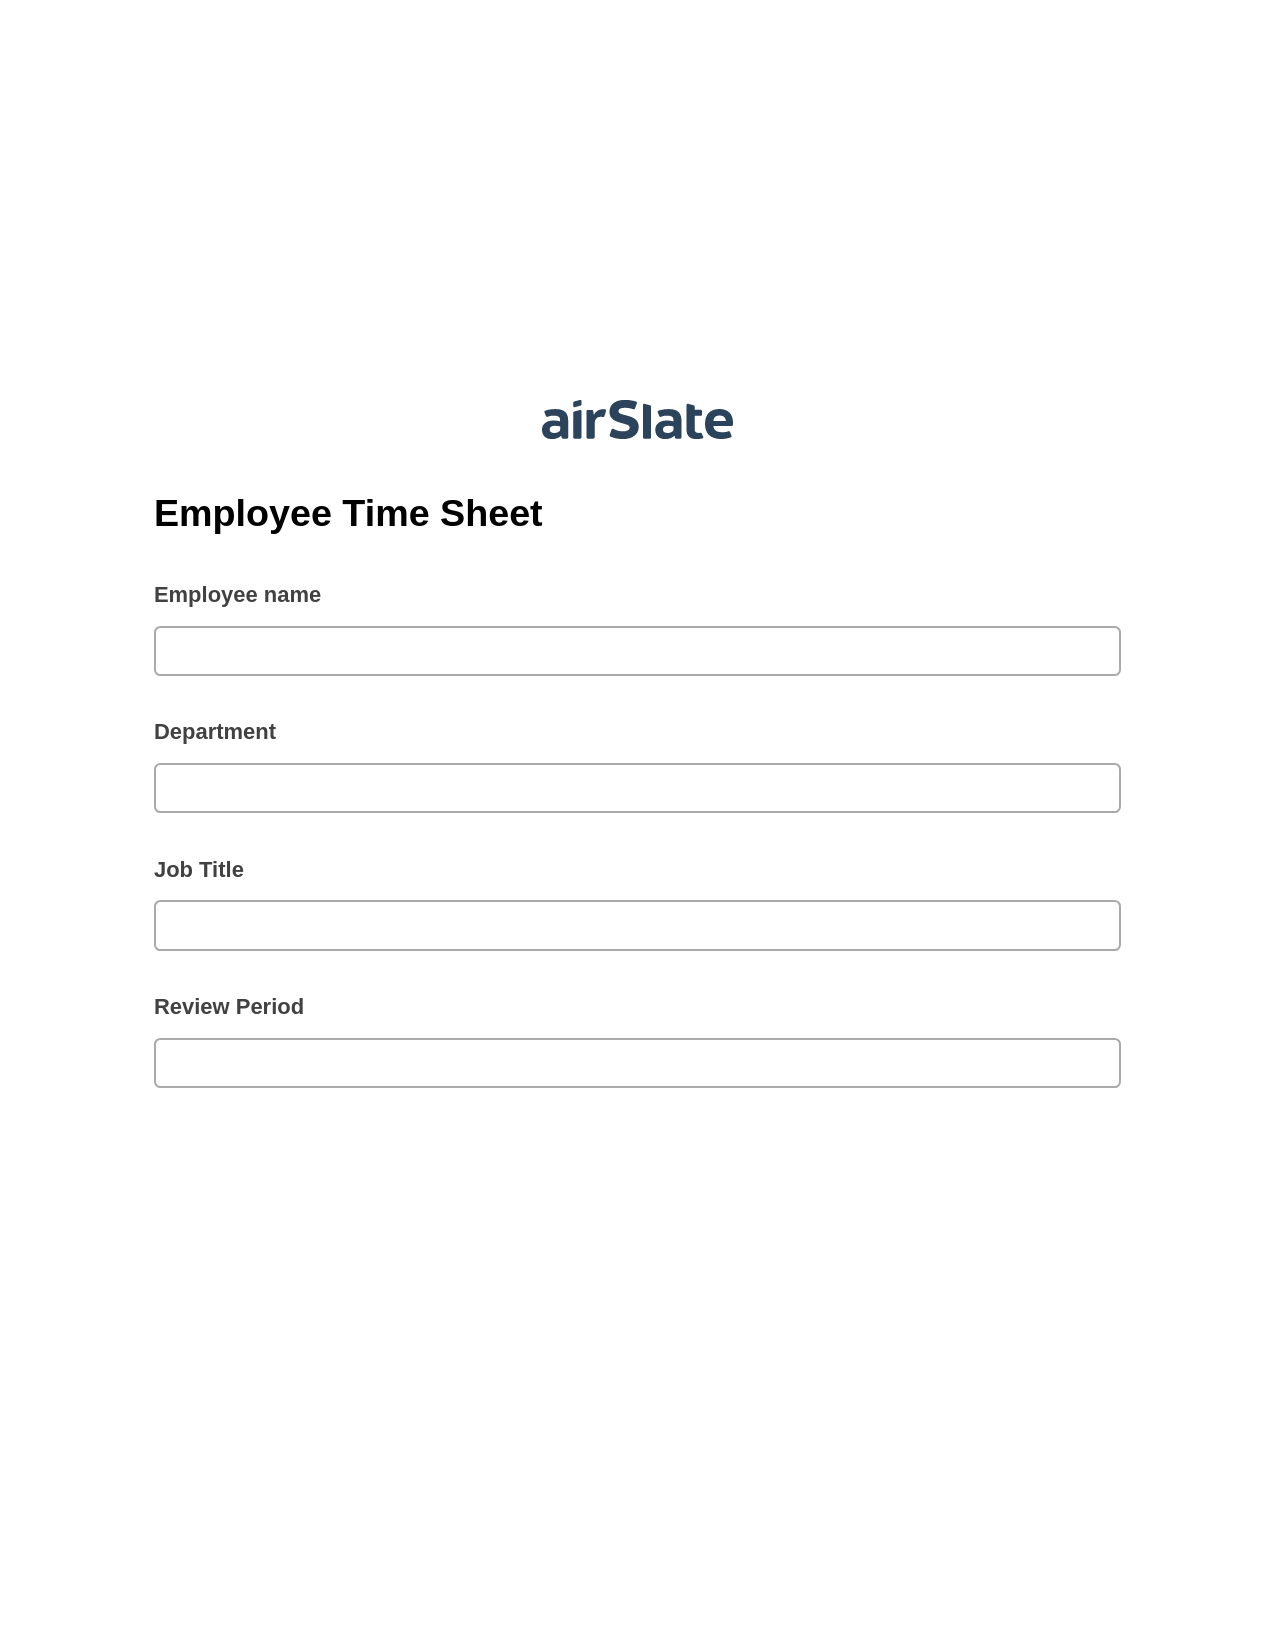 Employee Time Sheet Pre-fill Dropdowns from Airtable, Create Salesforce Records Bot, Export to Salesforce Record Bot